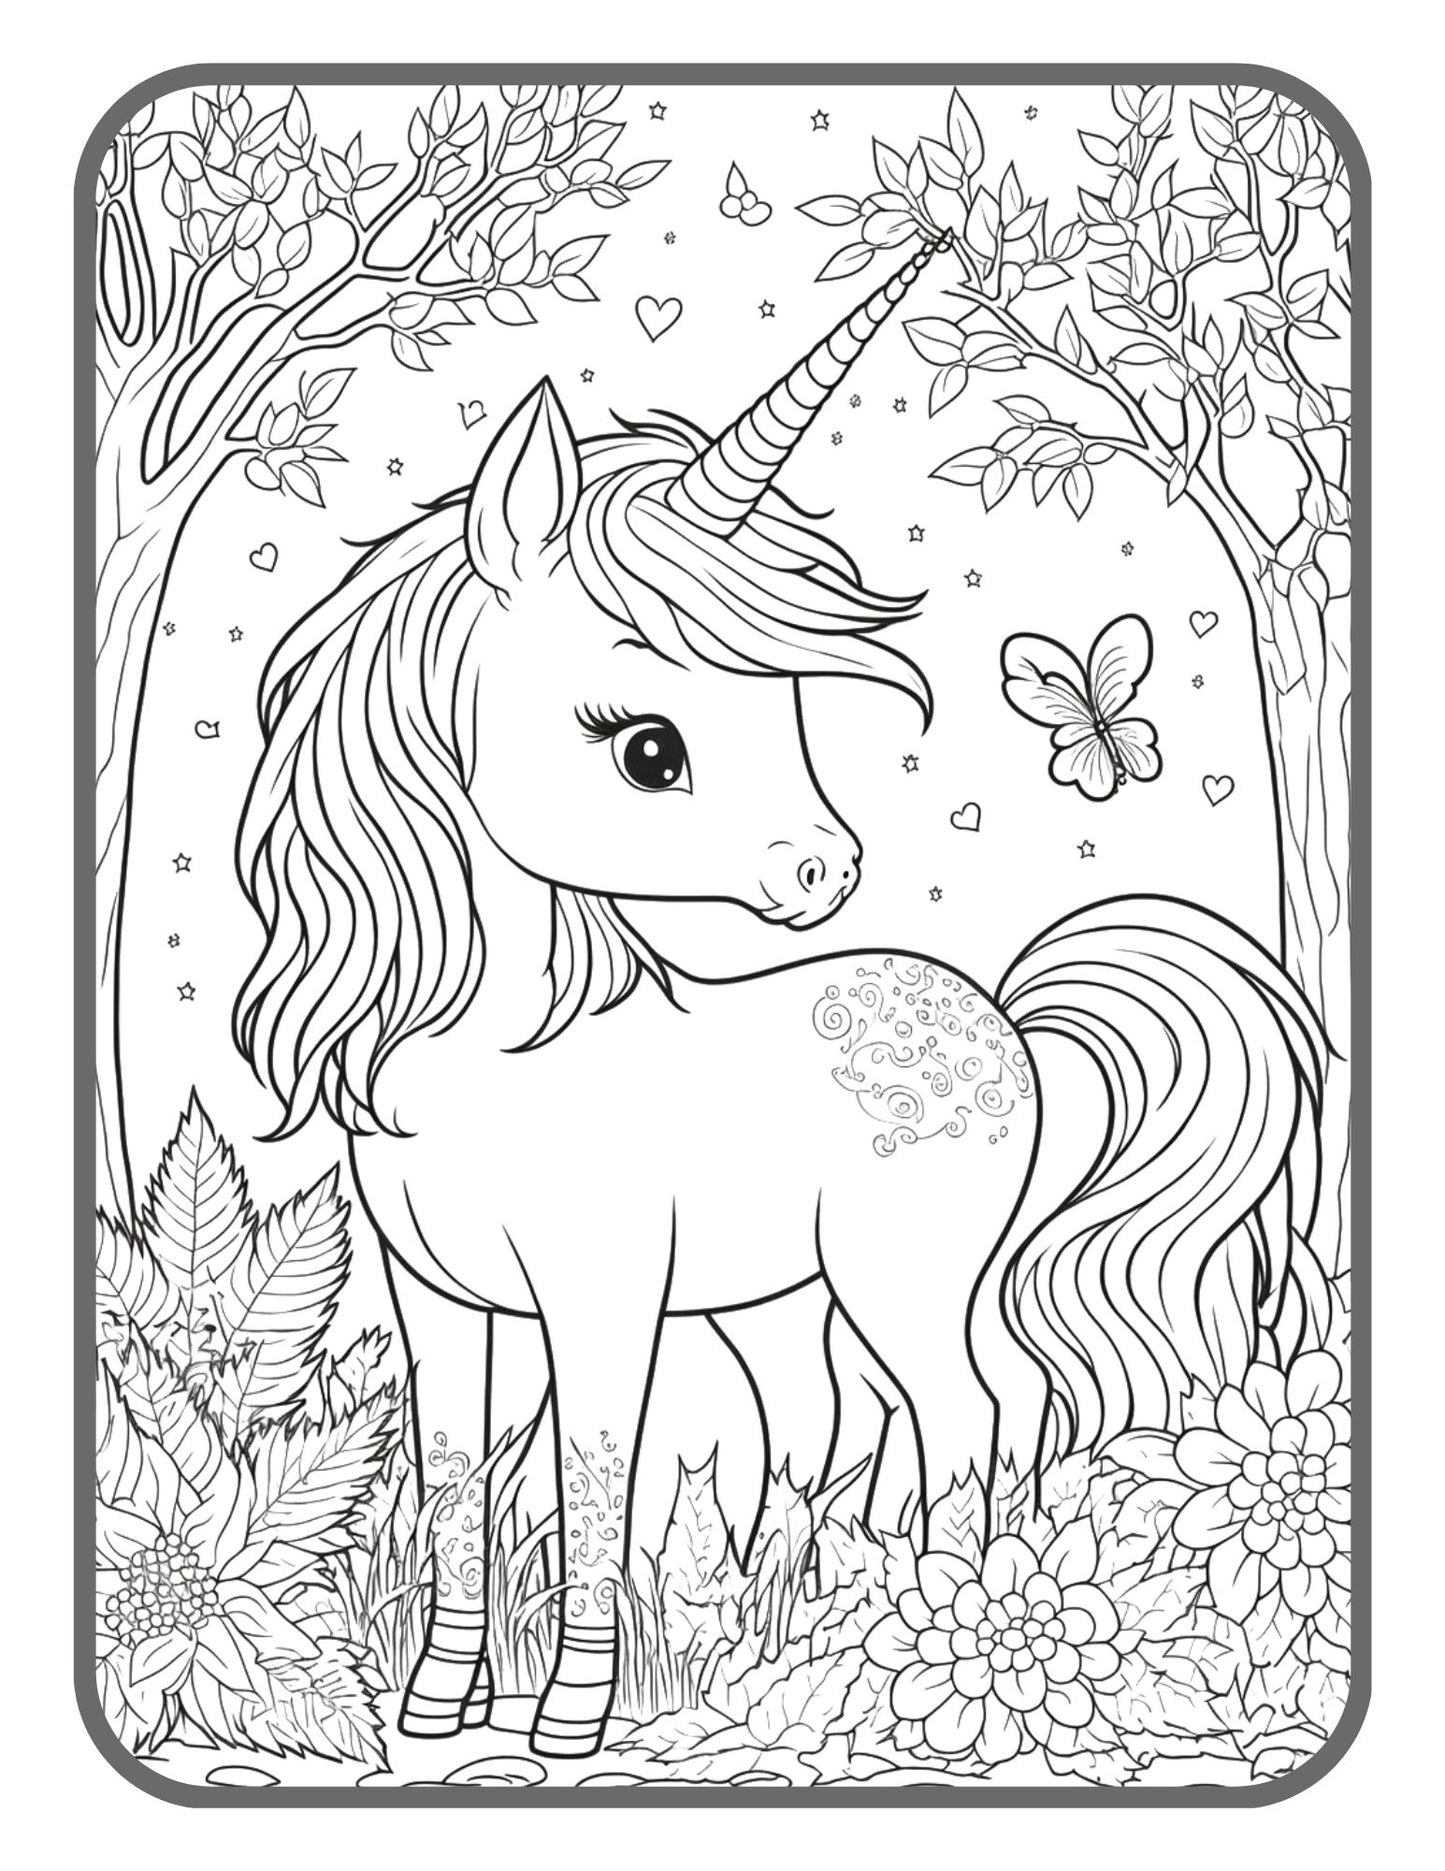 Unicorn Birthday Gift Activity Coloring Book Cute Animal Unicorn Horse Coloring Book Unicorn Coloring Books For Girls Boys Kids Adult Gift